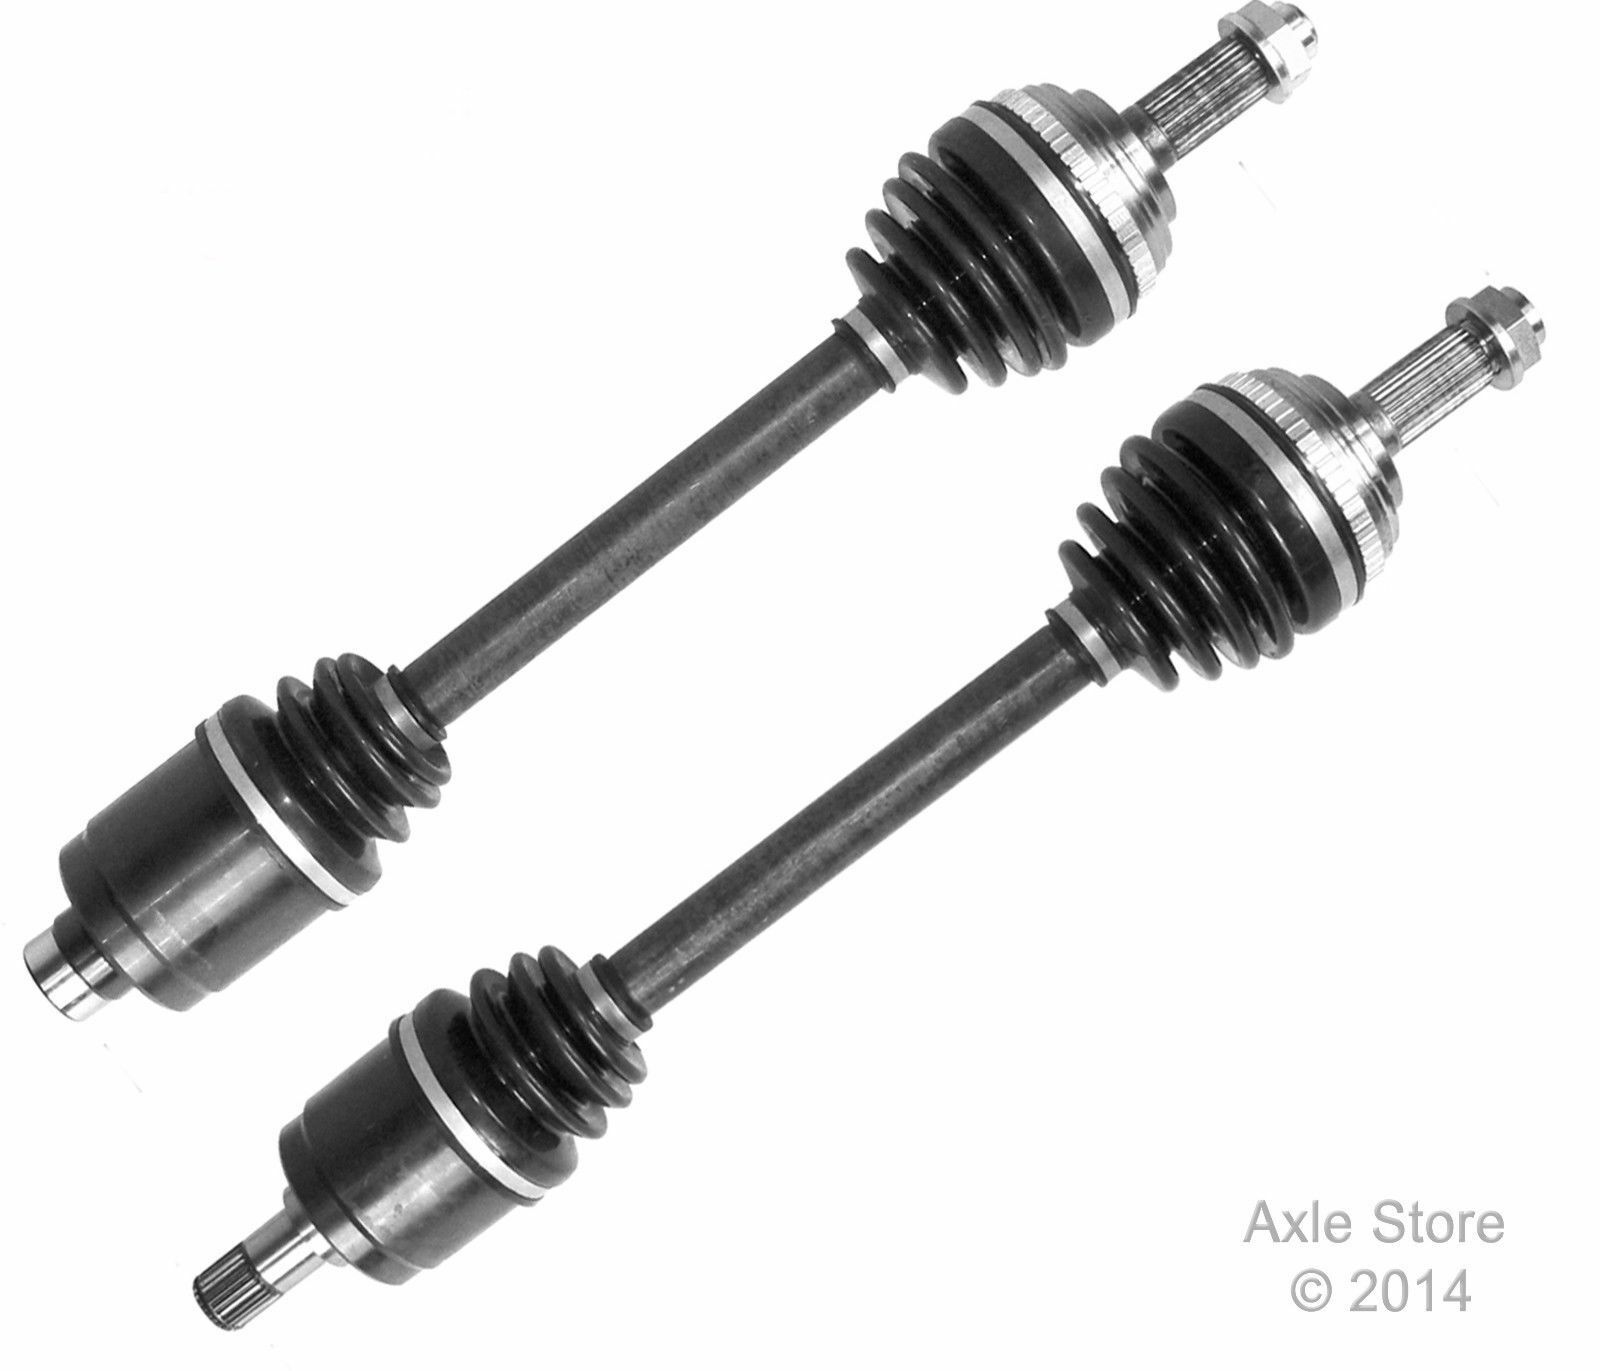 2 New Front Cv Axles Fit Acura Integra Gs, Ls, Rs And Type R, With Warranty